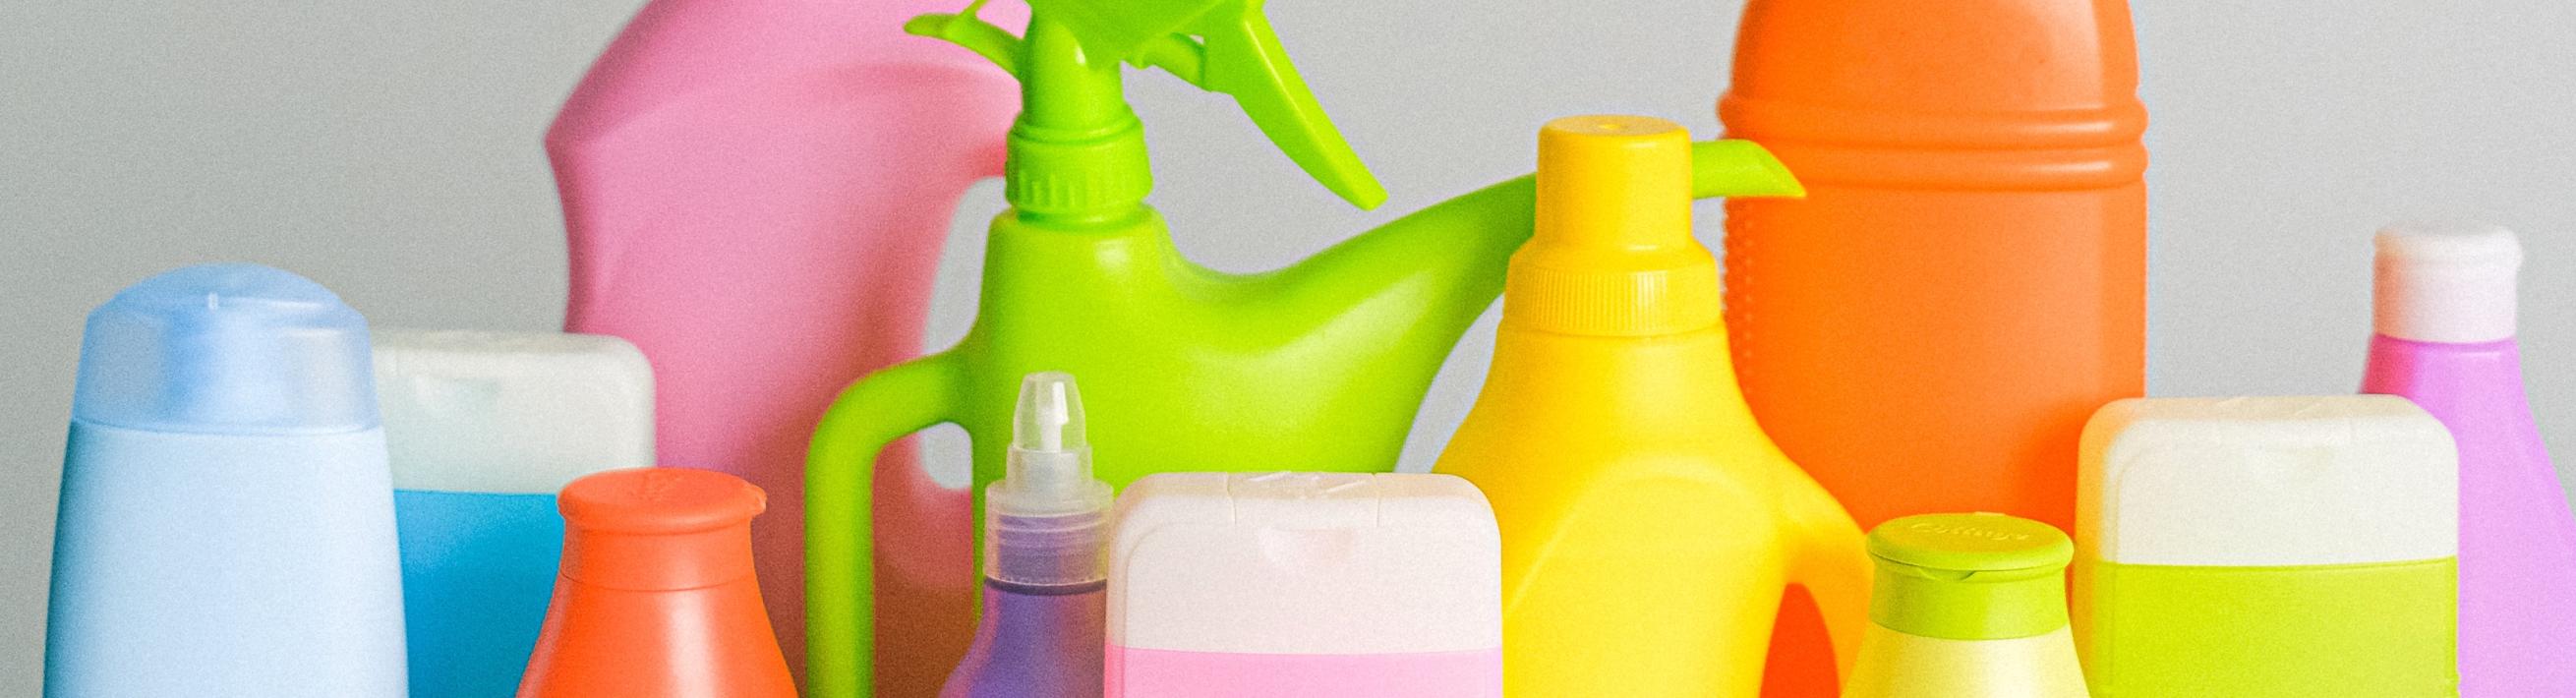 Mult-colored bottles of cleaning products